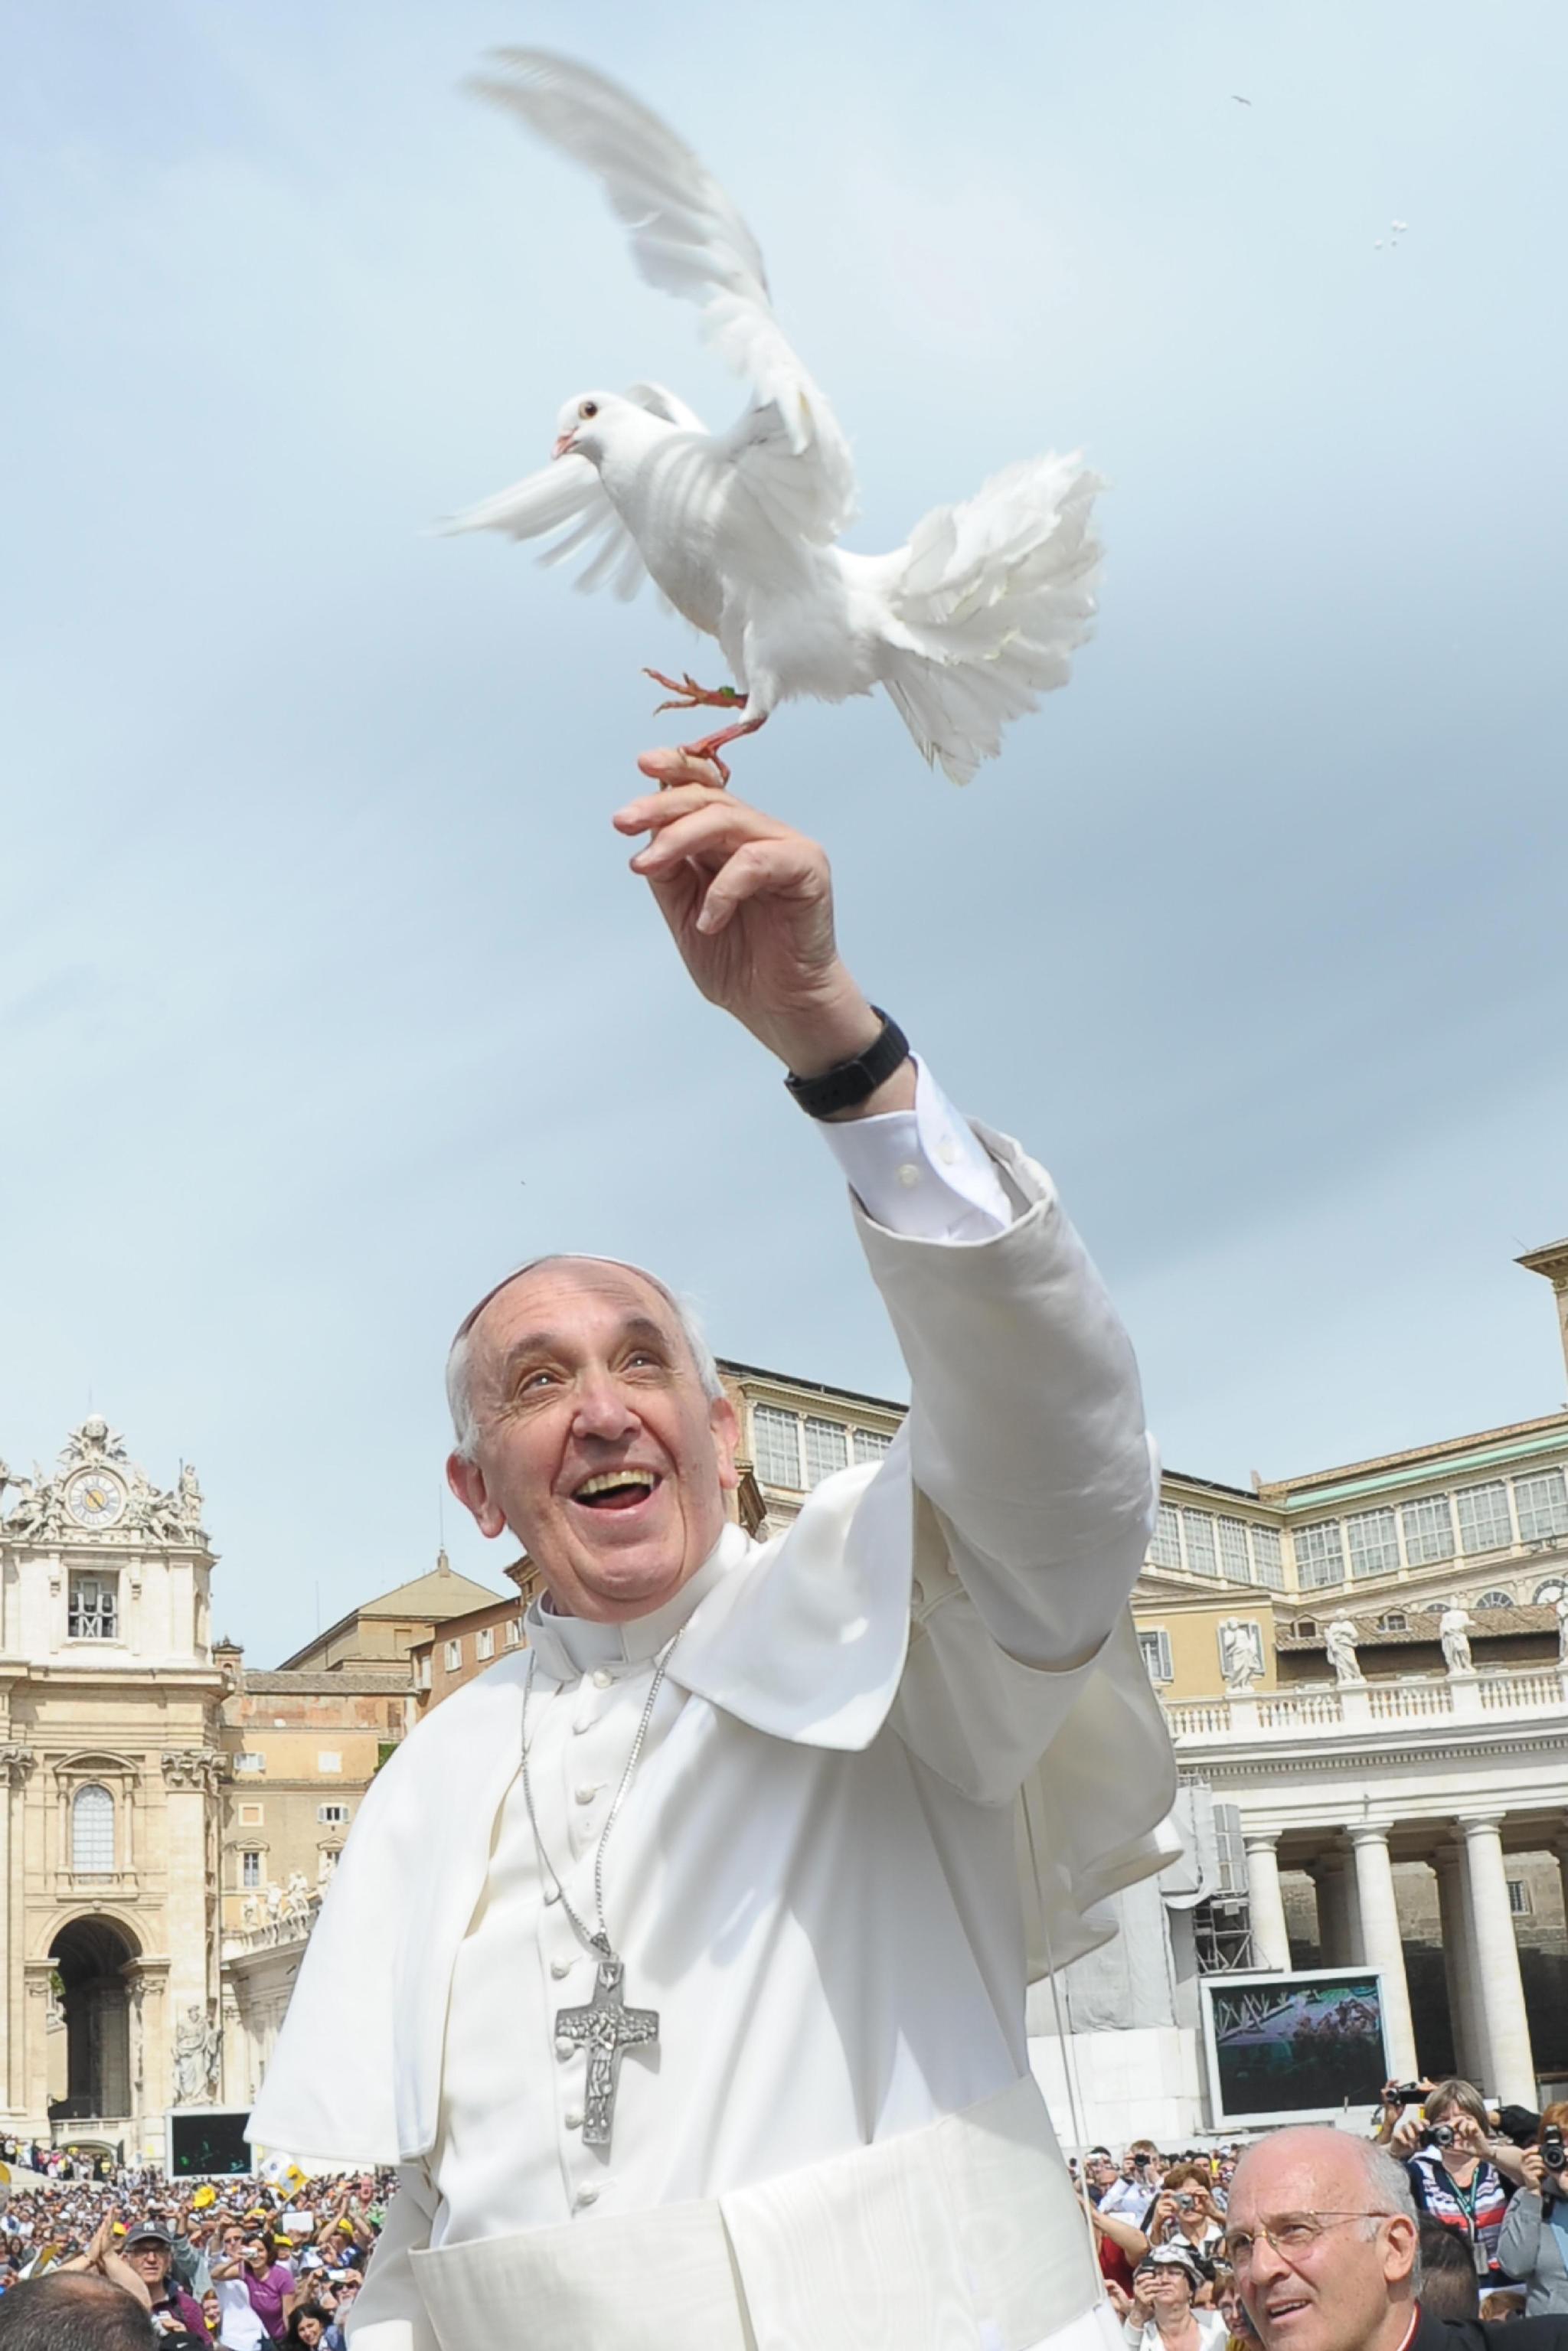 ansa - andrea acquarone - POPE FRANCIS RELEASING TWO DOVES DURING GENERAL AUDIENCE